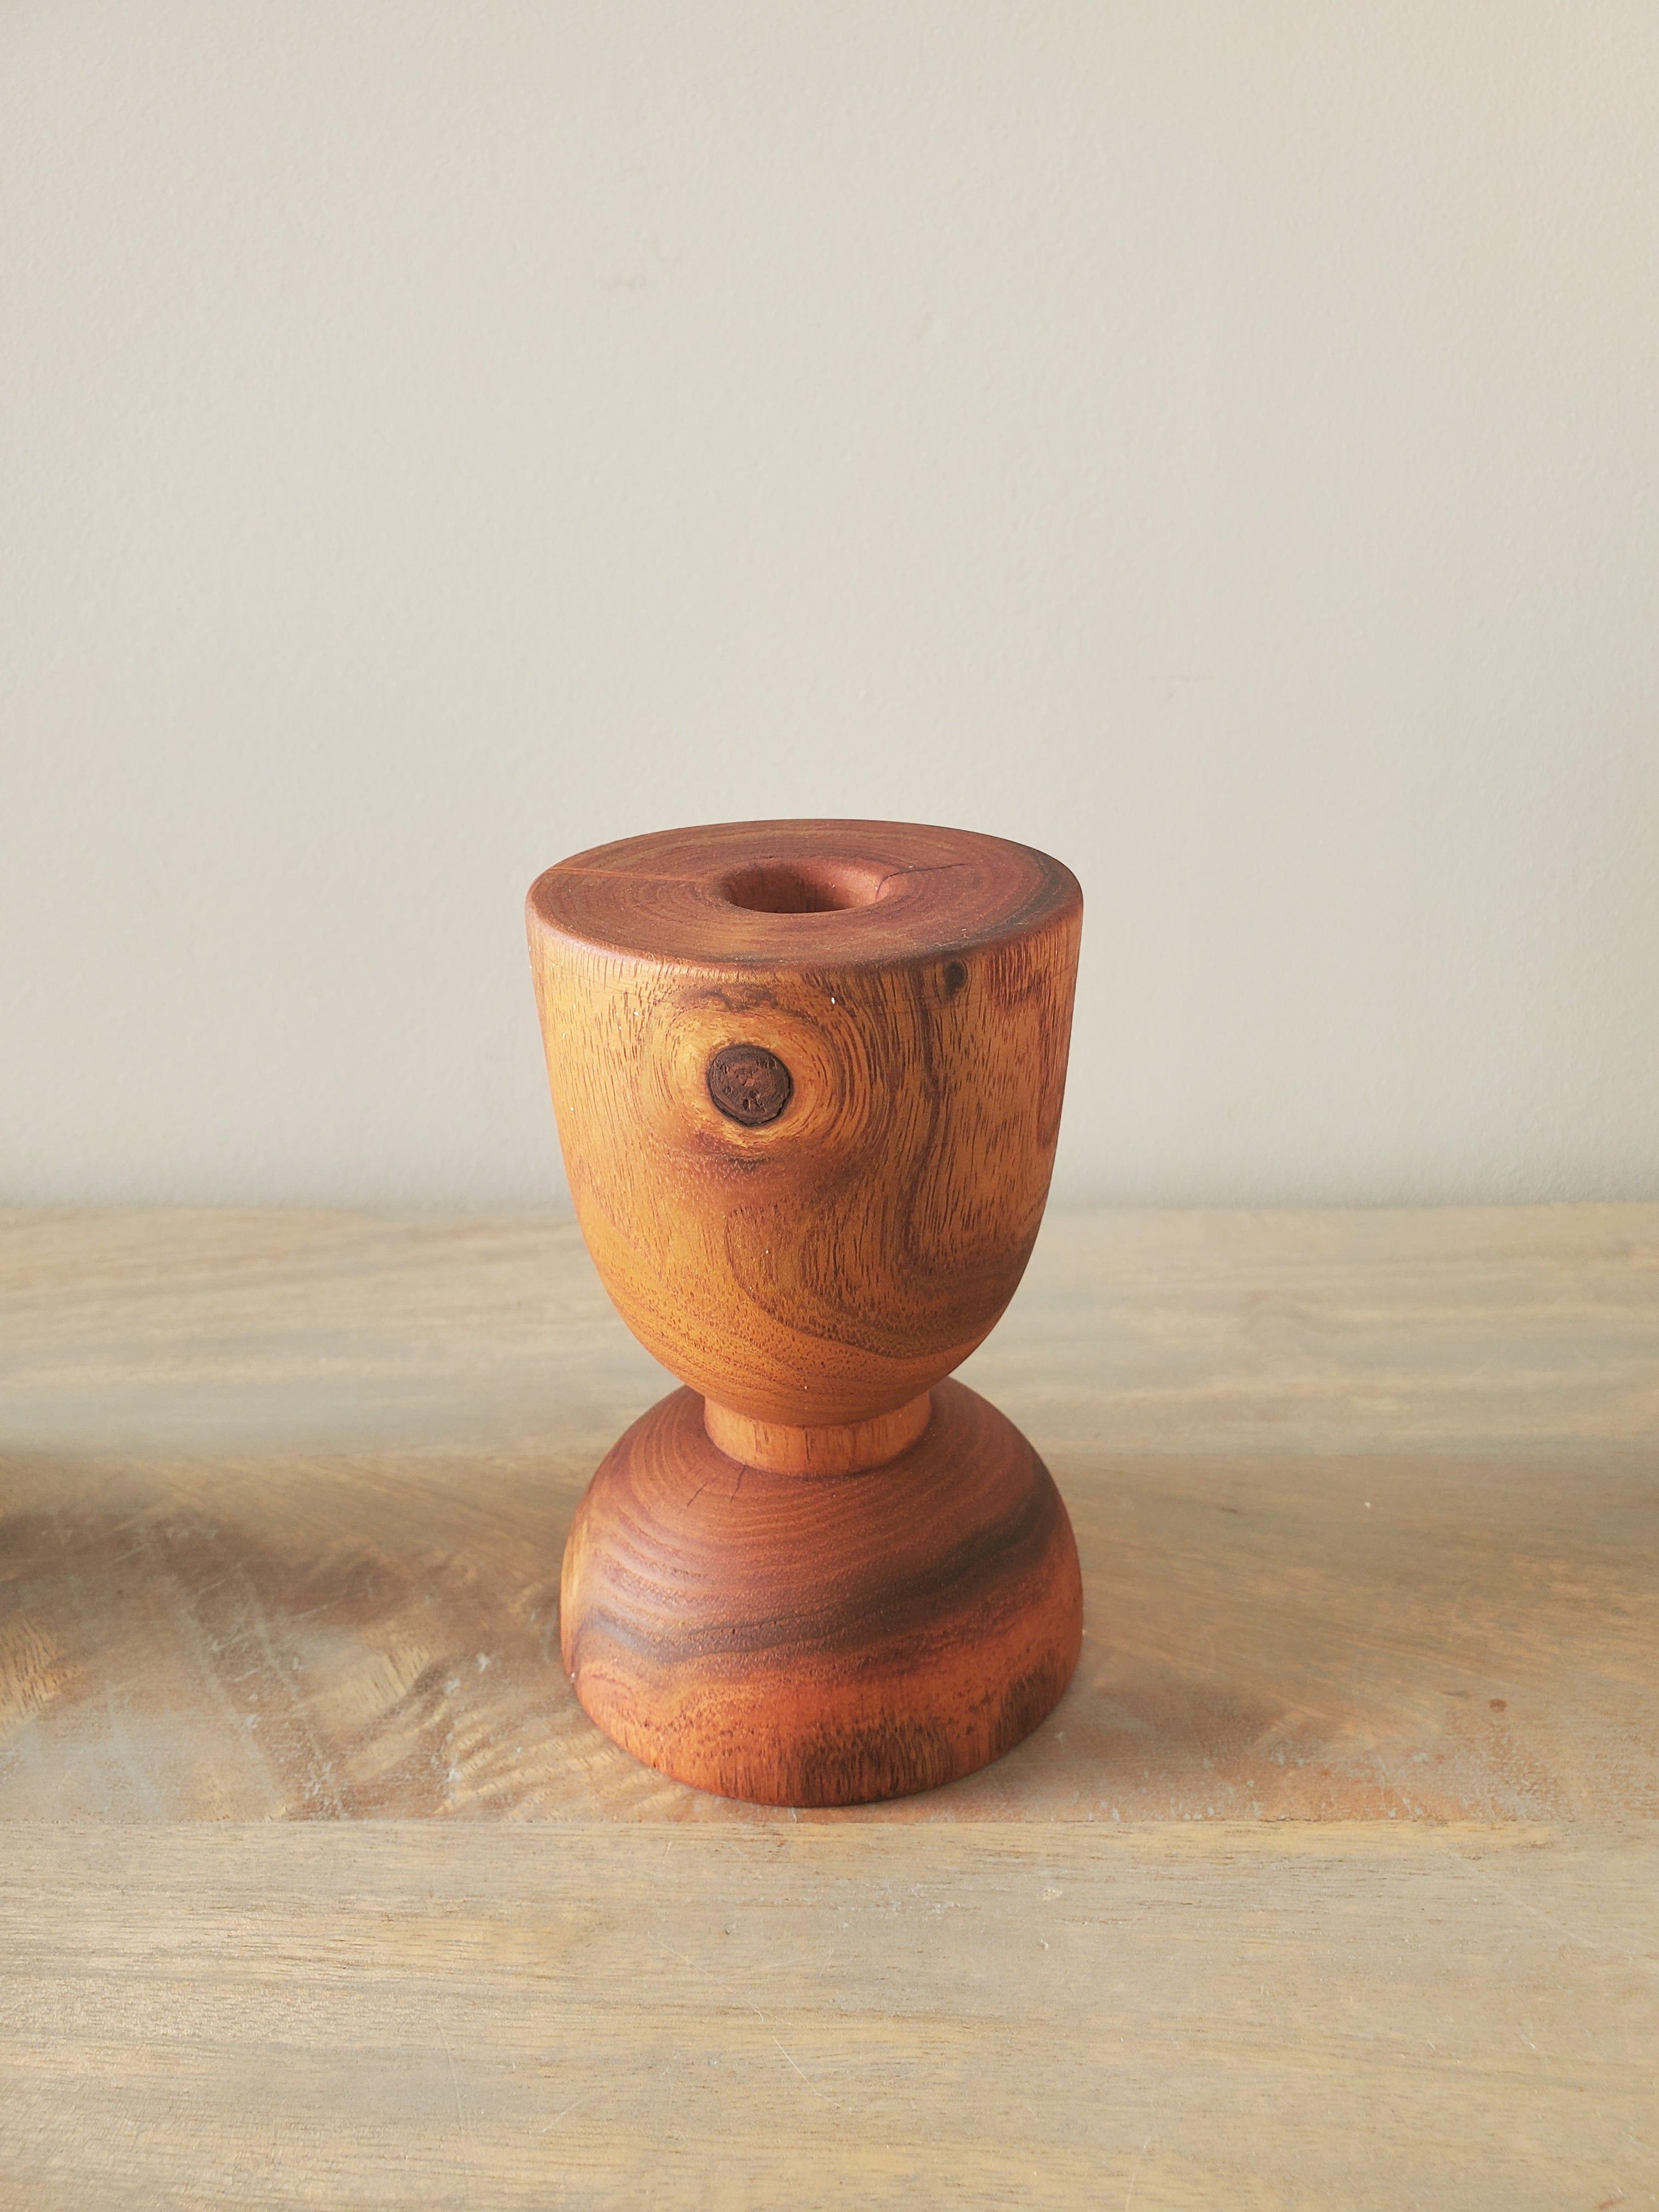 Short / Mahogany Rooted Tapered Candle Holder For home table settings and home decor or dinner party